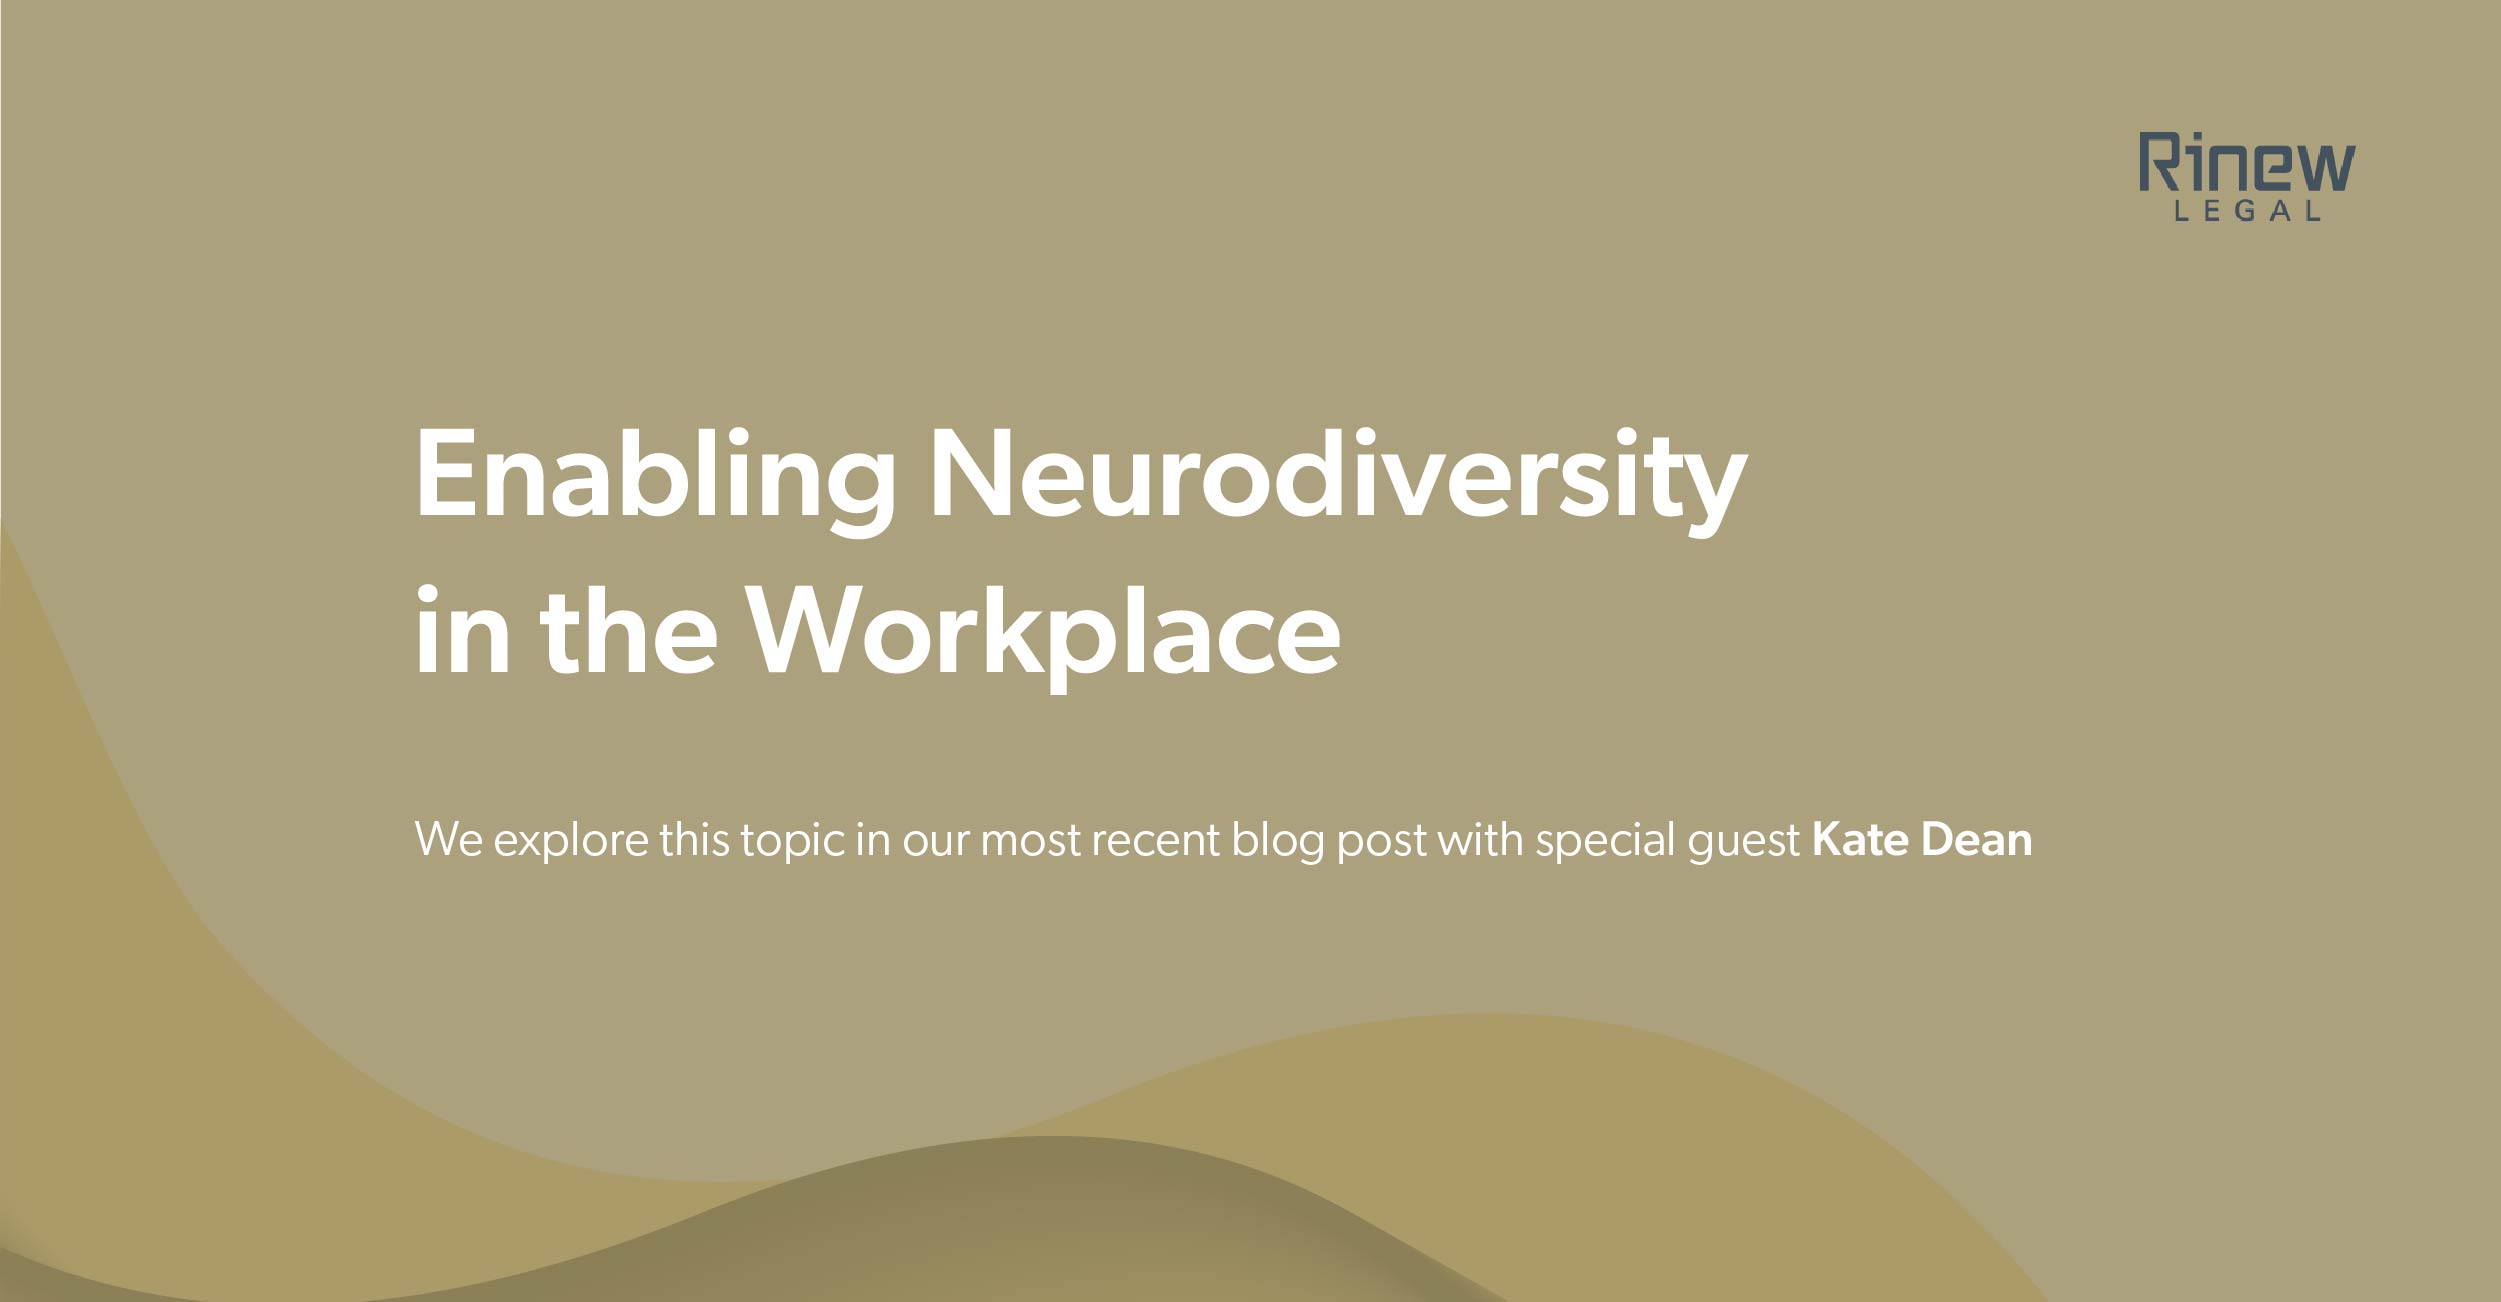 Featured image for “ENABLING NEURODIVERSITY IN THE WORKPLACE”